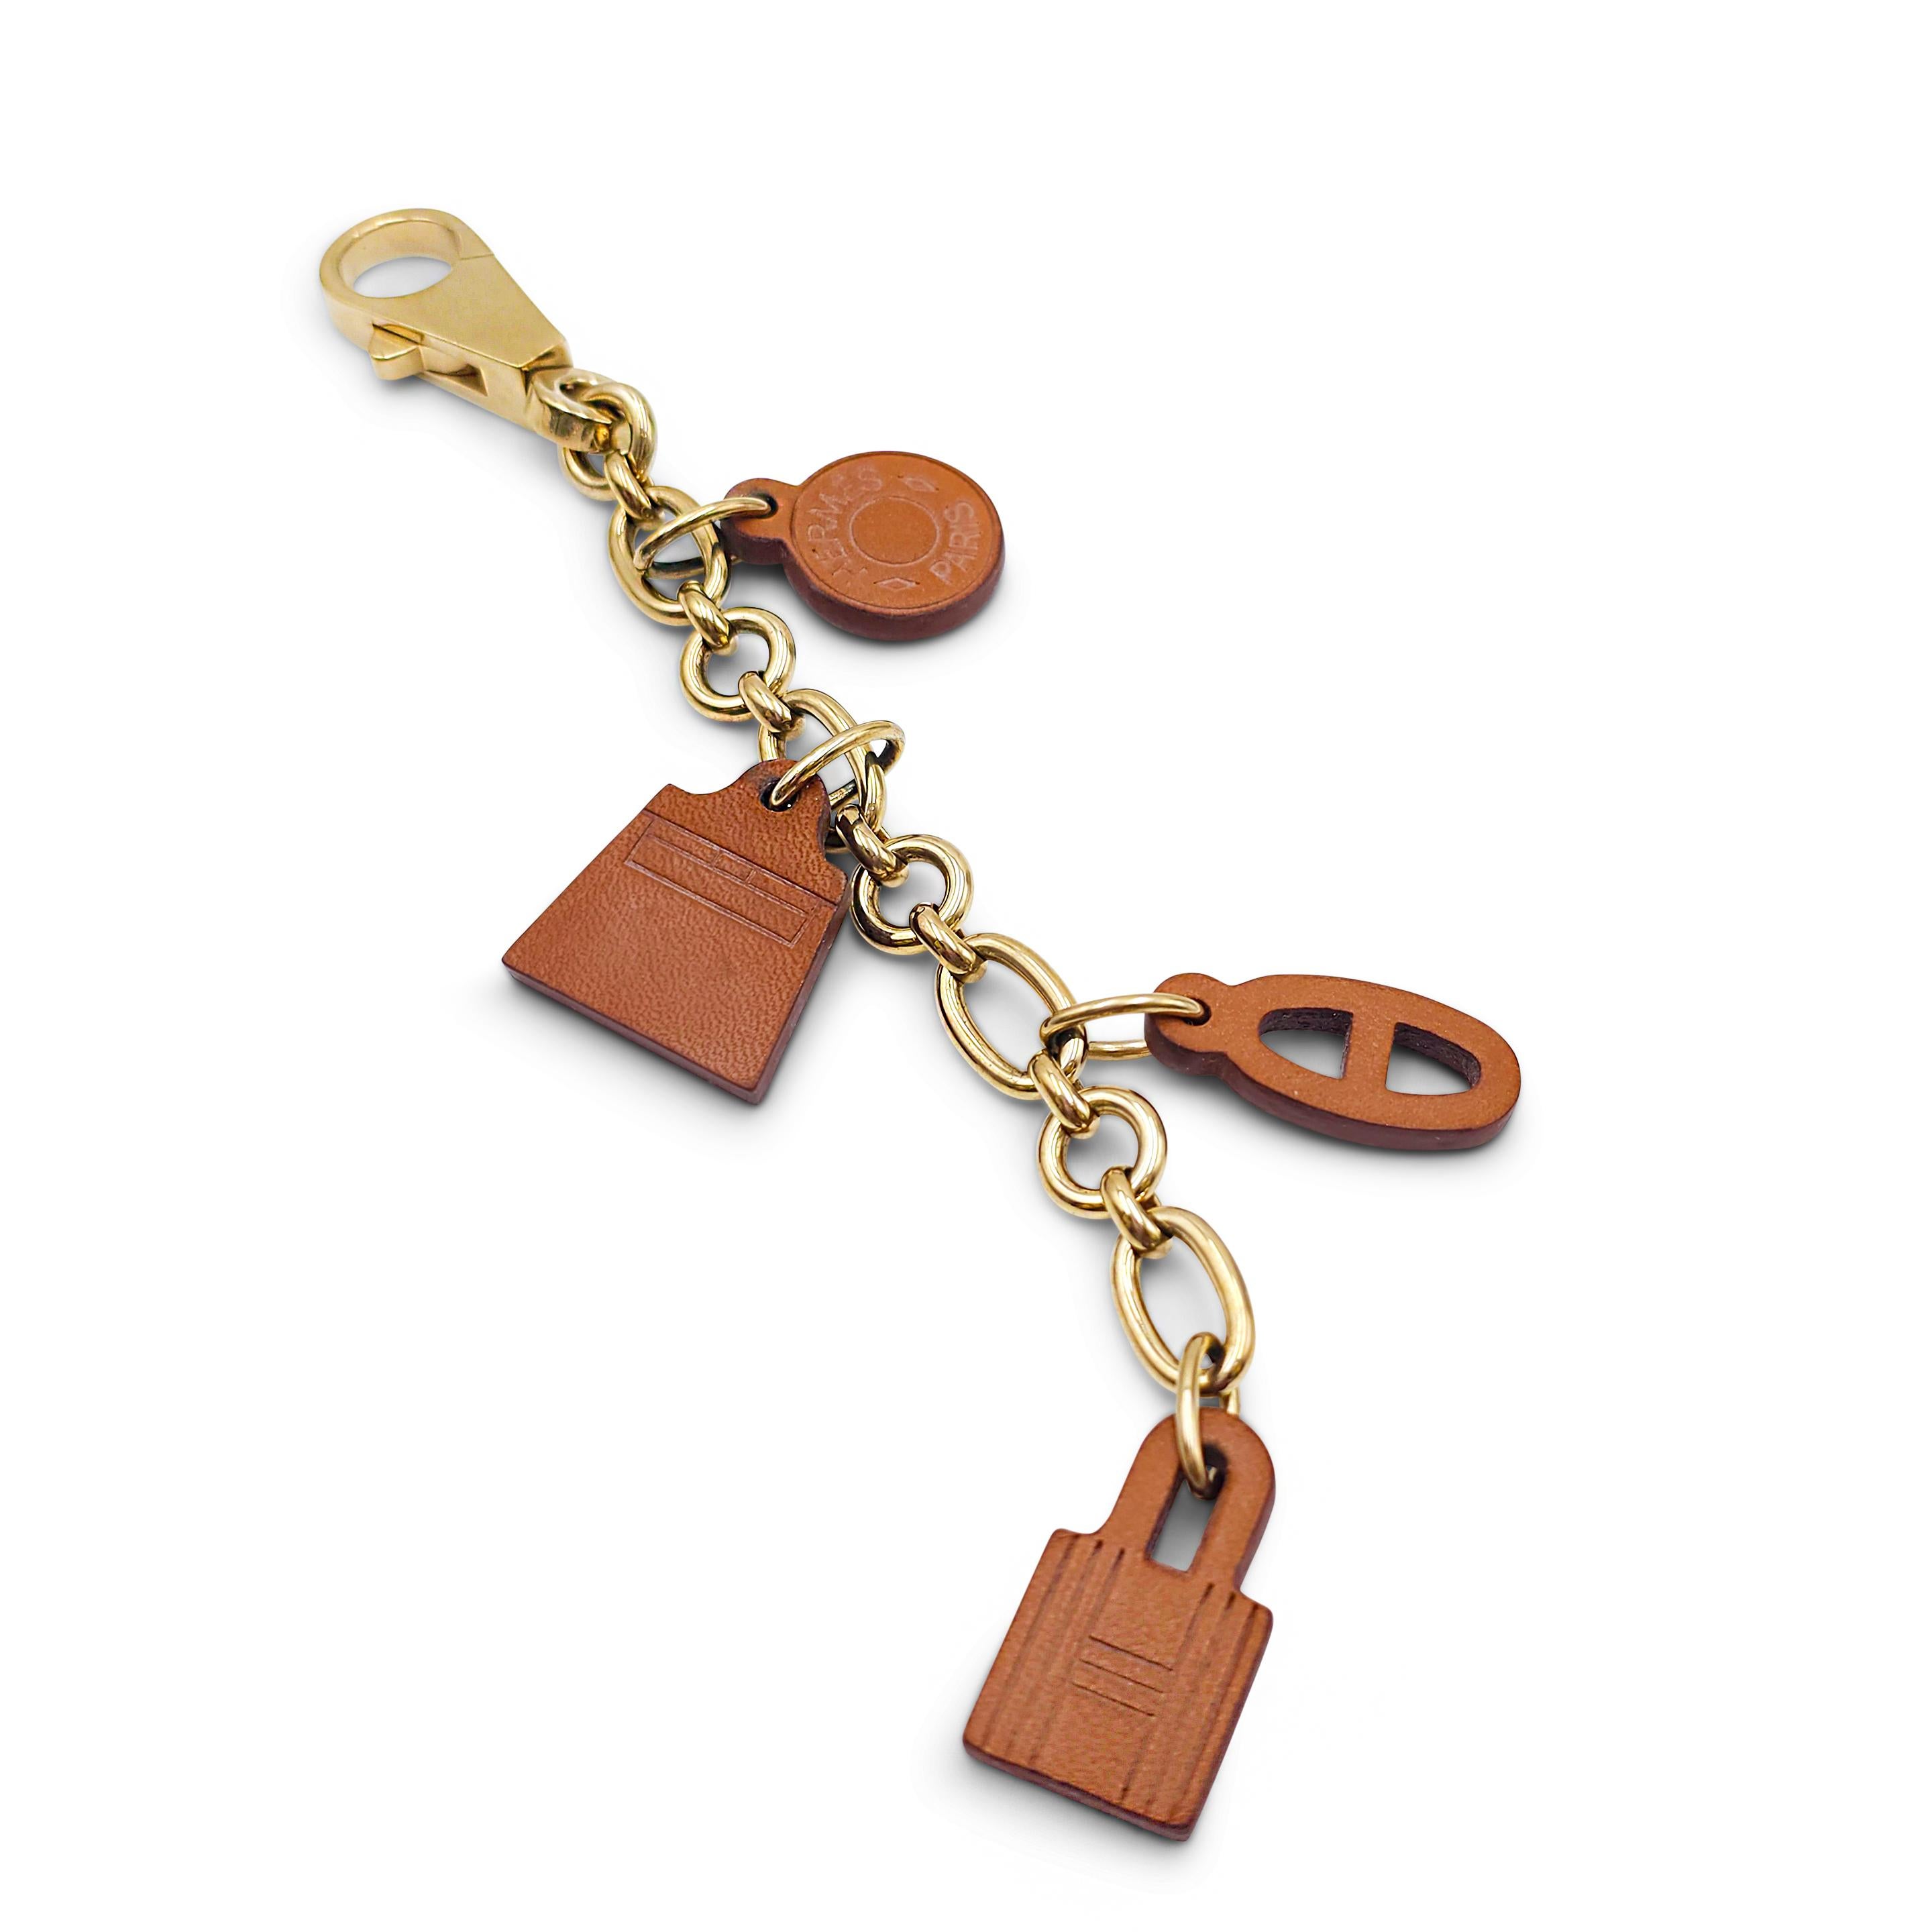 Authentic Hermès Olga bag charm featuring four of the brand's iconic charms crafted in Barenia leather.  The gold-tone chain measures 5 1/2 inches in length.  The cadenas lock charm hangs from the last link, bringing the total length of the bag